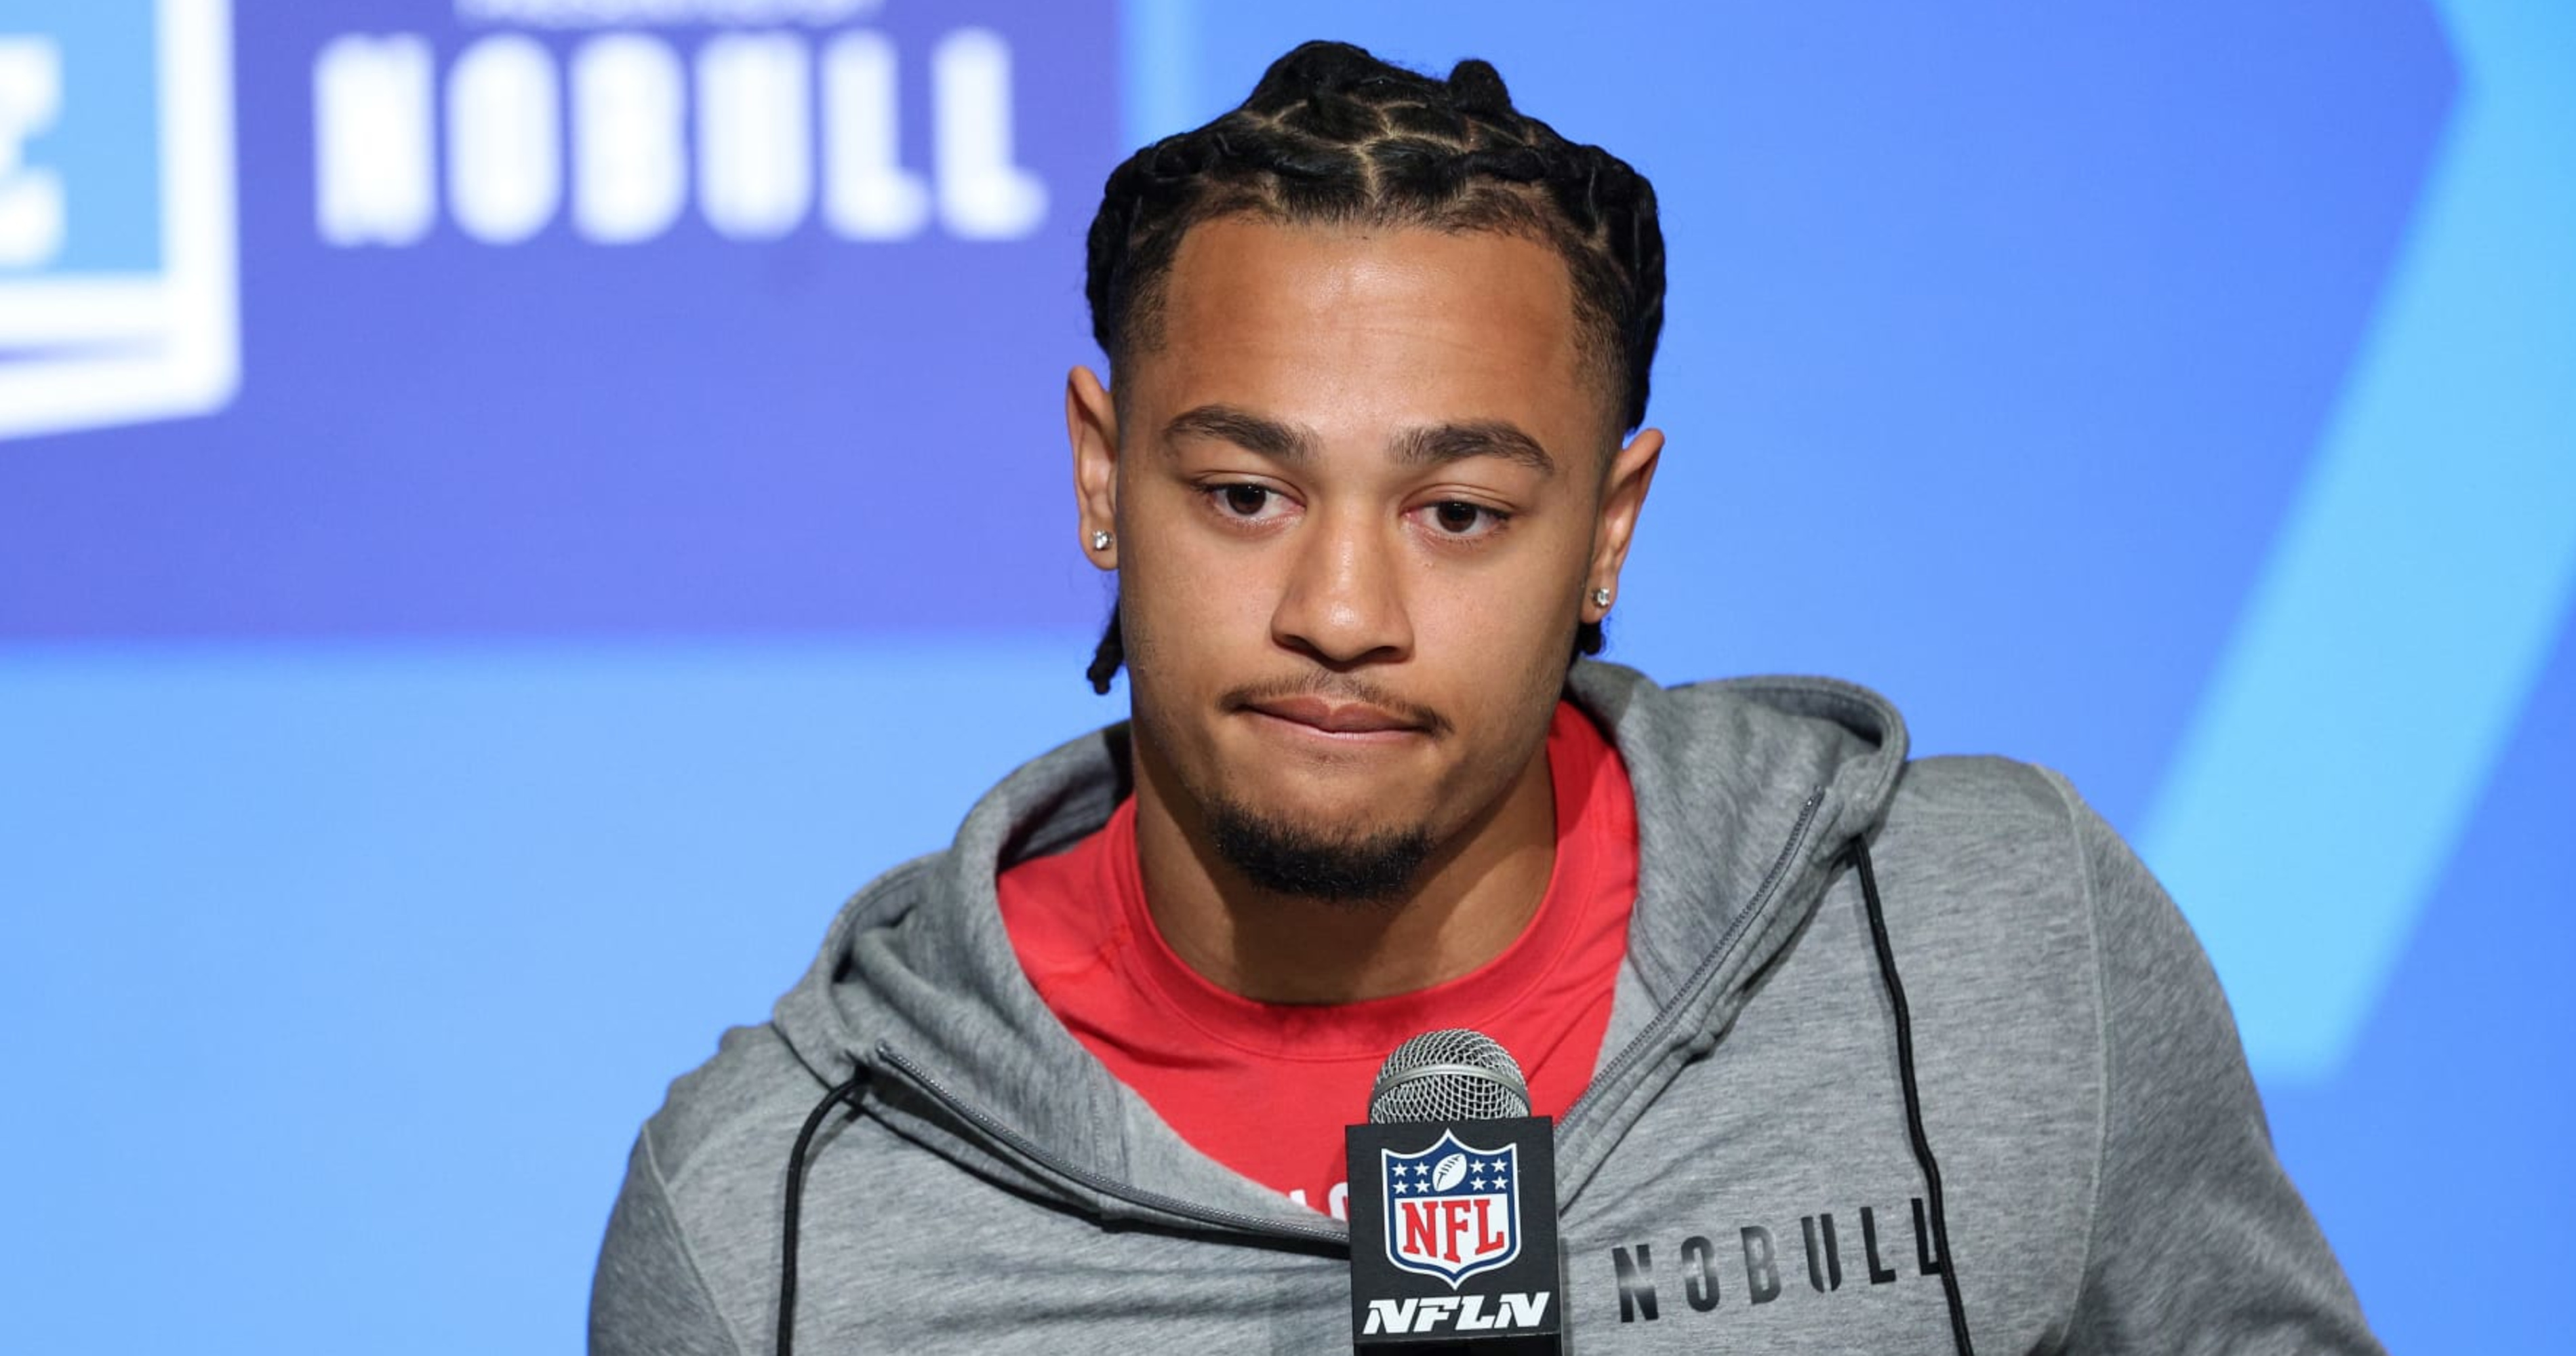 Ohio State WR Jaxon Smith-Njigba Meets With Cowboys, Packers, Patriots ...